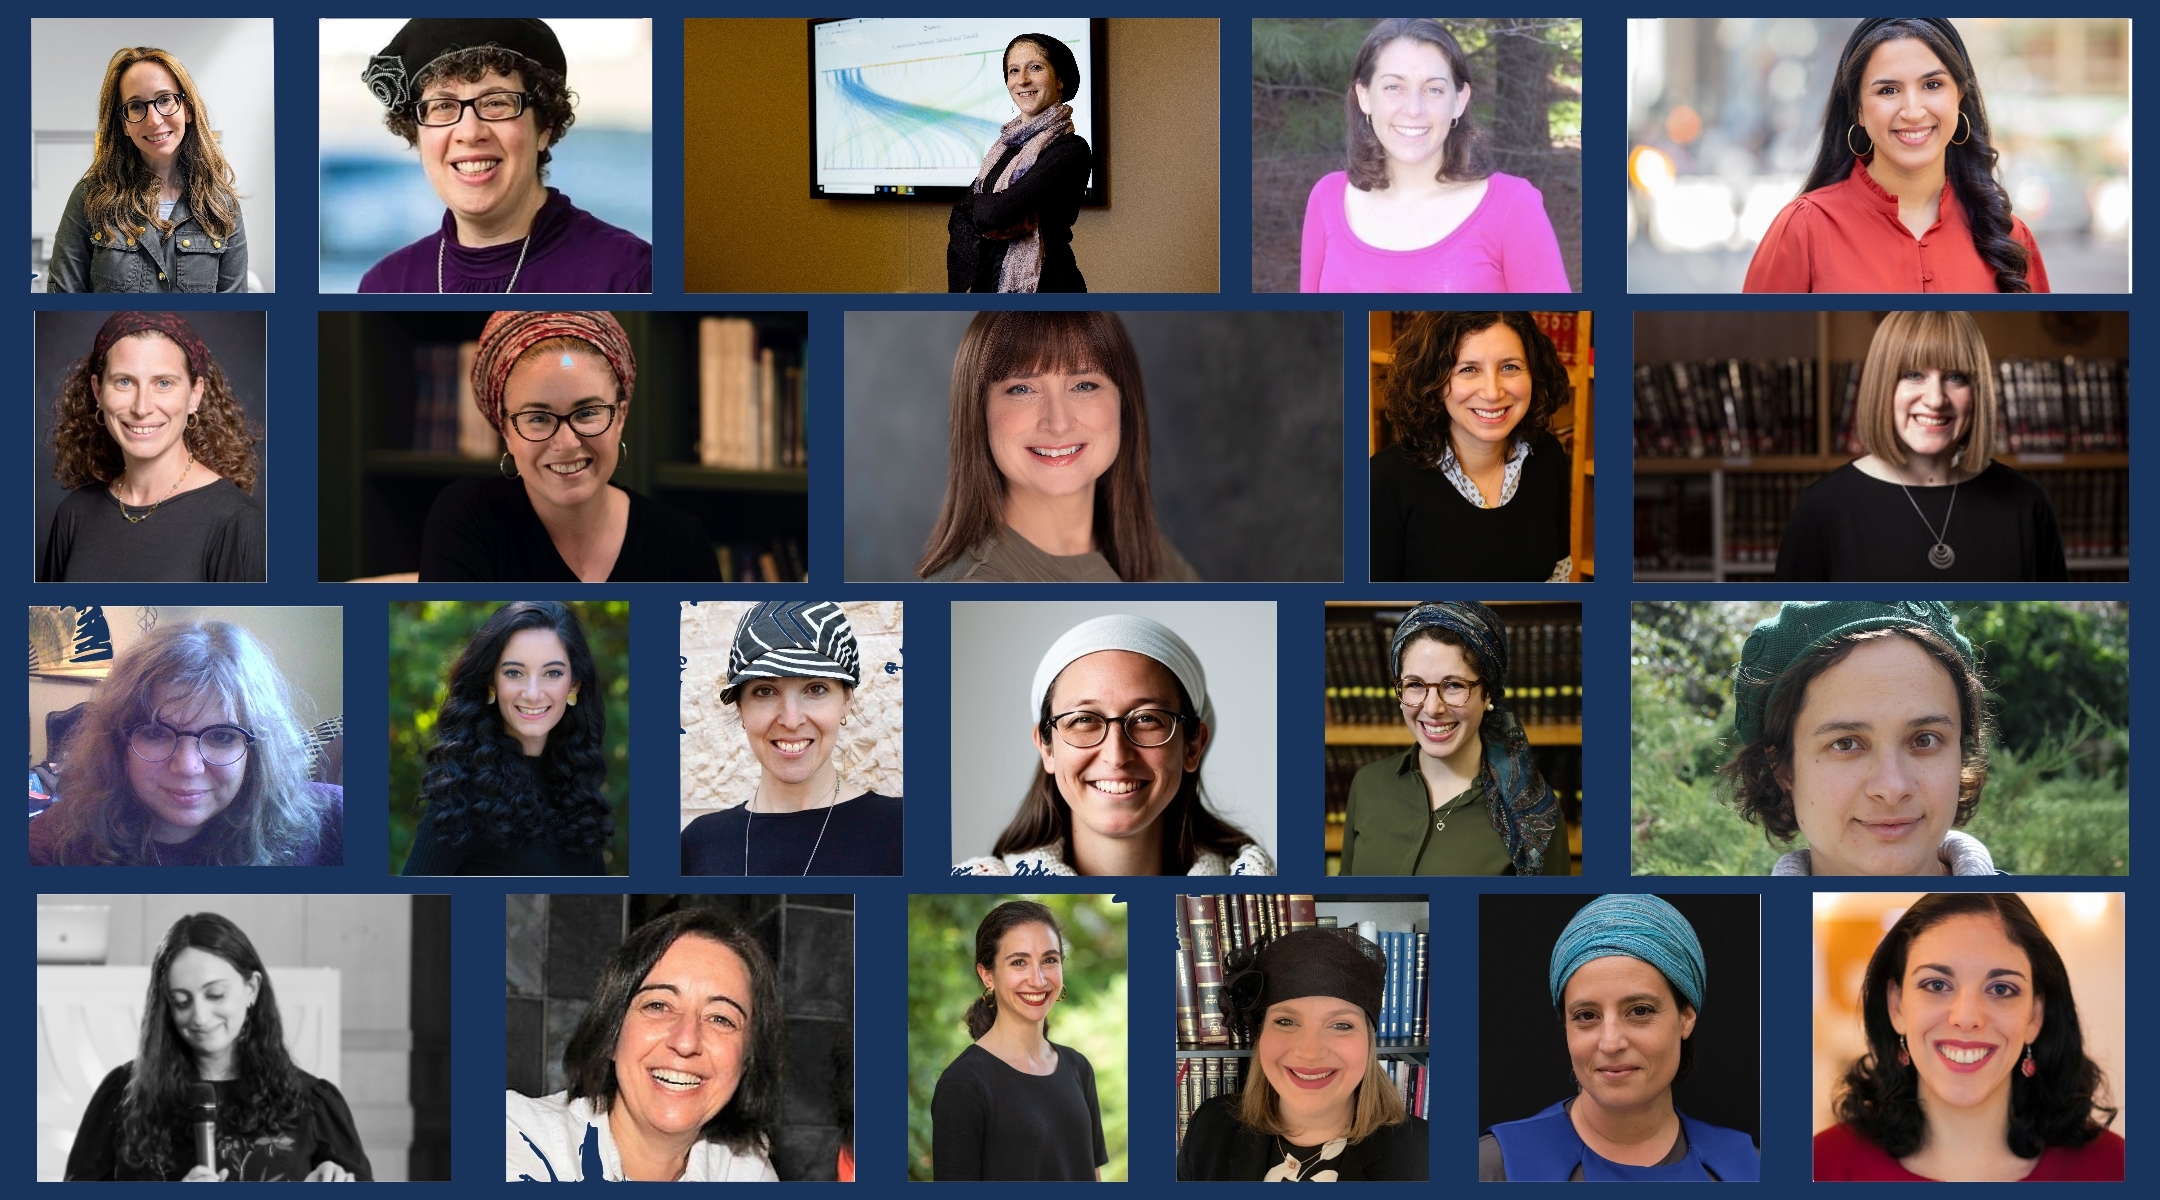 20 women Torah scholars will write books as part of the Word-by-Word project. (Courtesy of Sefaria)